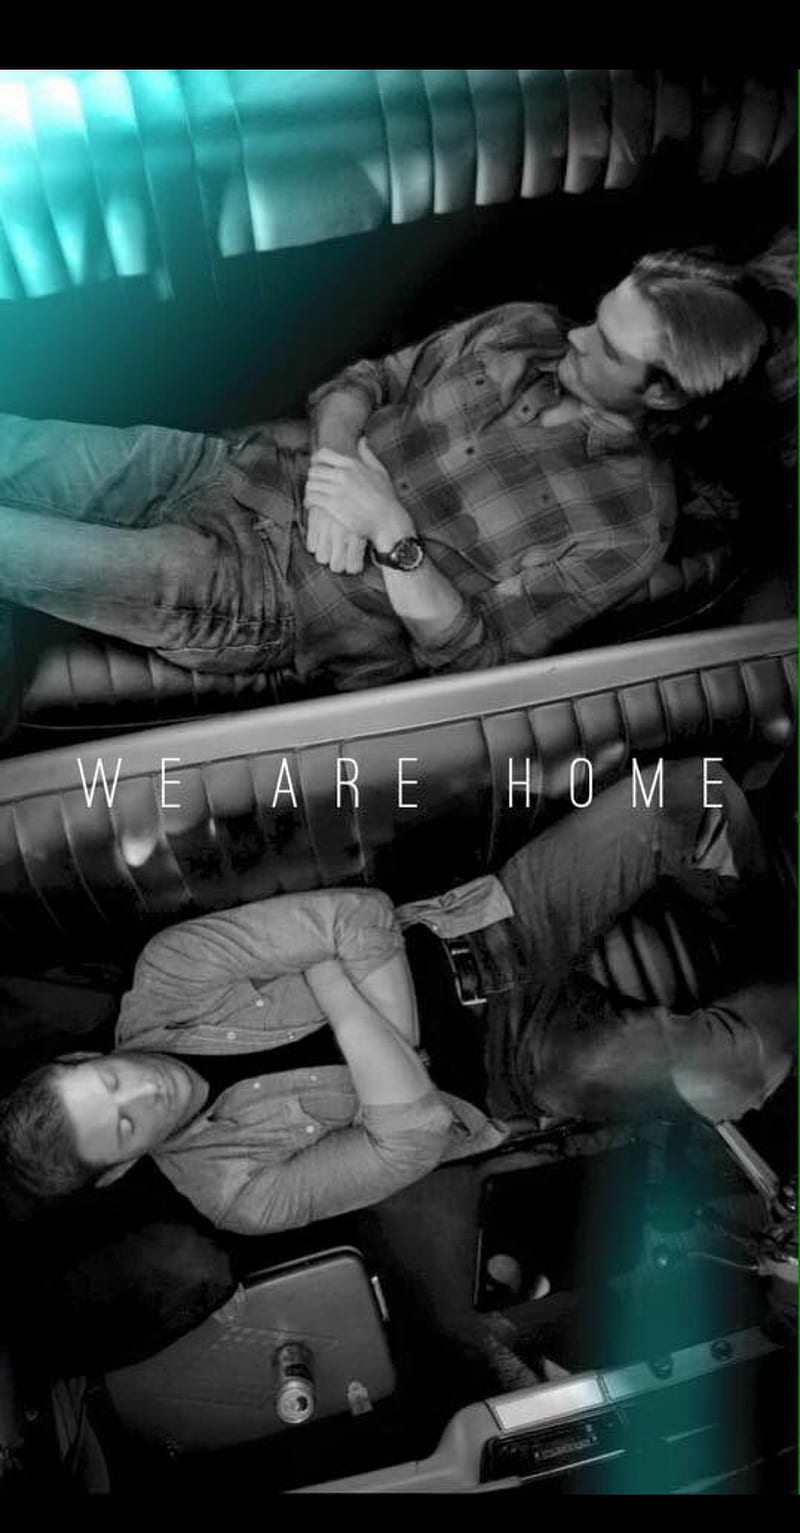 We Are Home, ackles, dean, dean winchester, jared, jared padalecki, jensen, jensen ackles, padalecki, sam, sam winchester, HD phone wallpaper